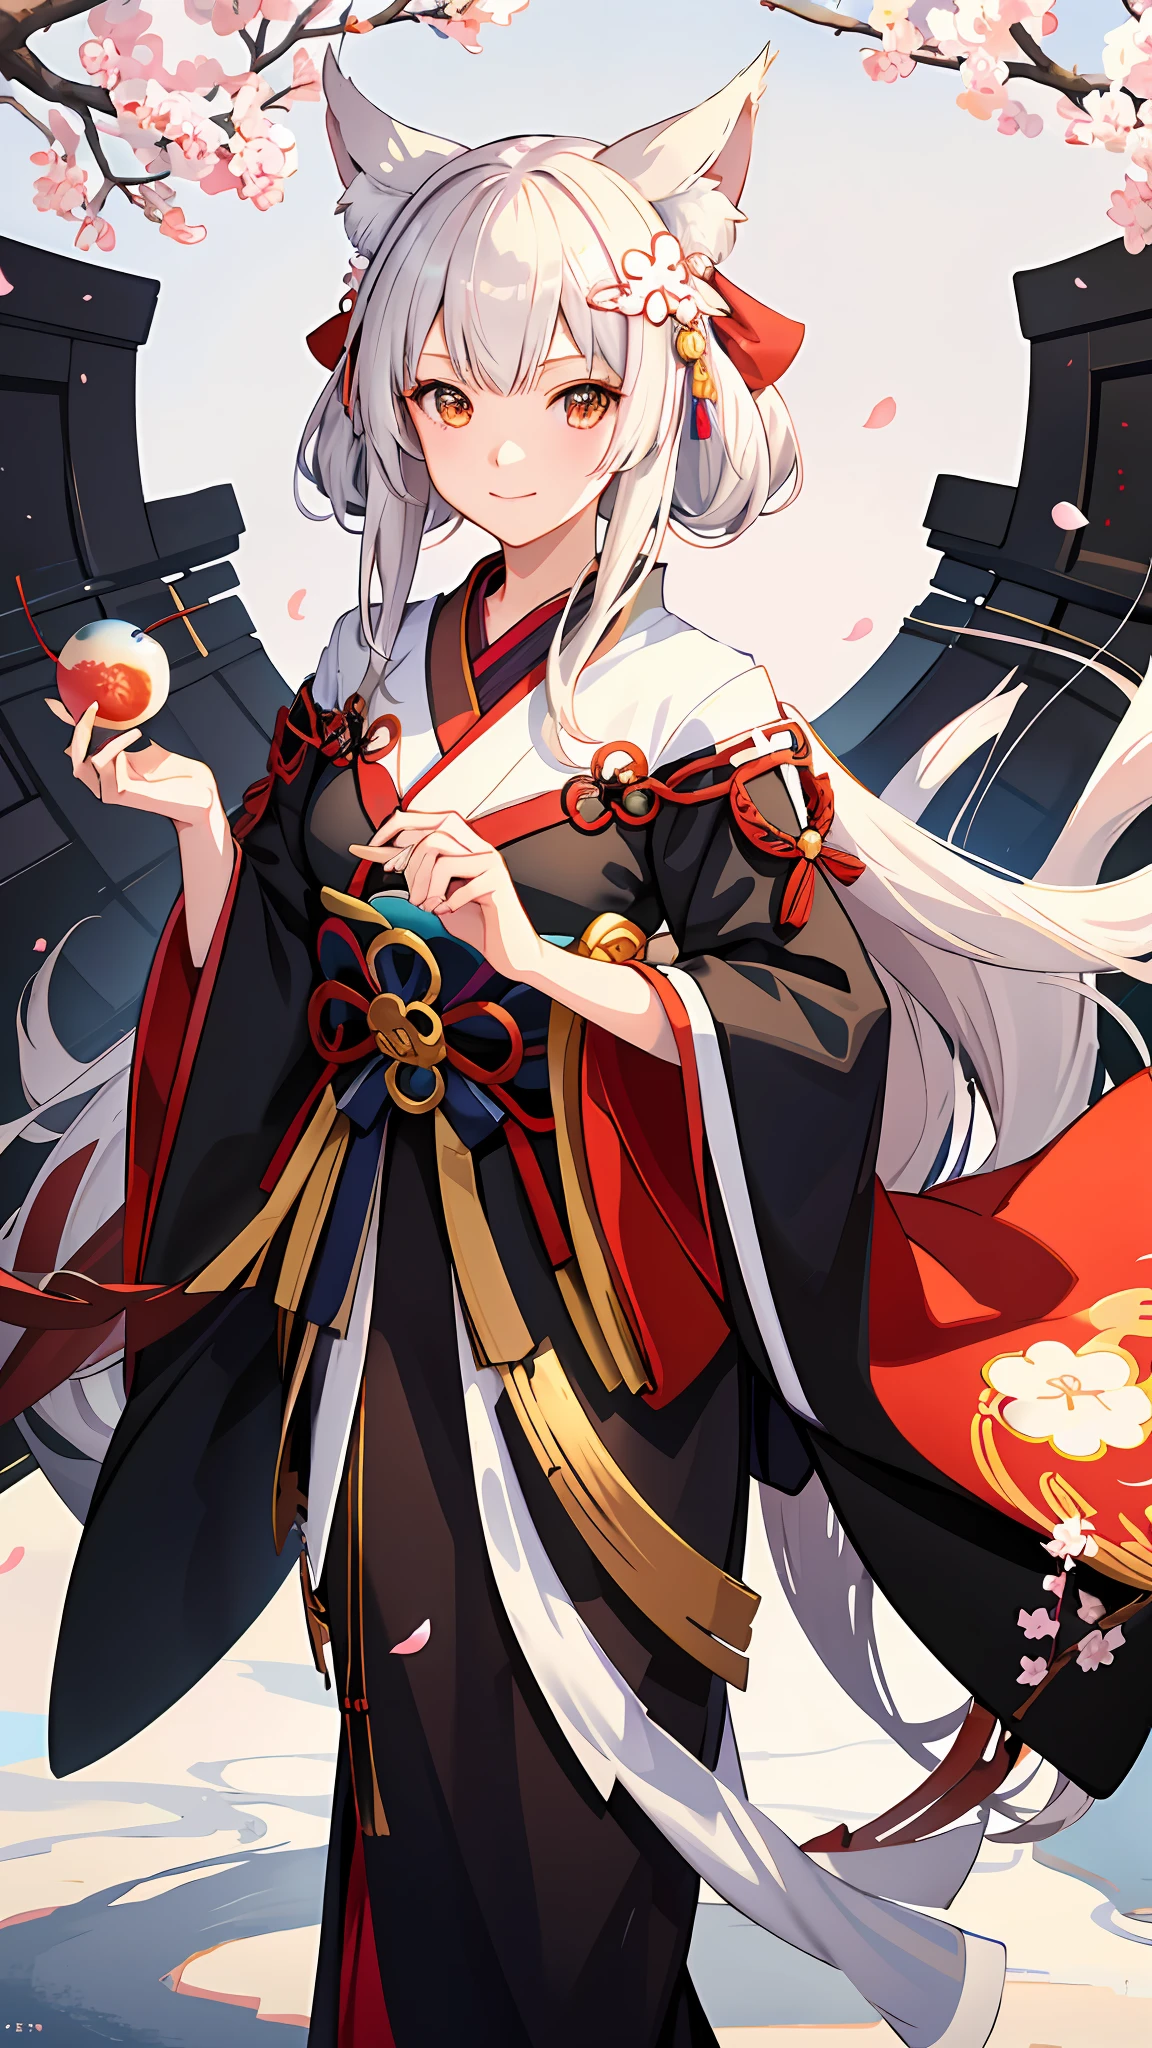 kimono, standing, 1 girl, 8K, White lining, Black coat, High quality, Look at the viewer，beast ear, wearing a kitsune mask, brunette，shrines，torii，the cherry trees，Fluttering flowers，anime moe art style，Kantai collection style，a serene smile，azur lane style，anime visual of a cute girl，offcial art，a beautiful anime portrait，Beautiful anime girls，komono，onmyoji portrait，smooth anime cg art，8K